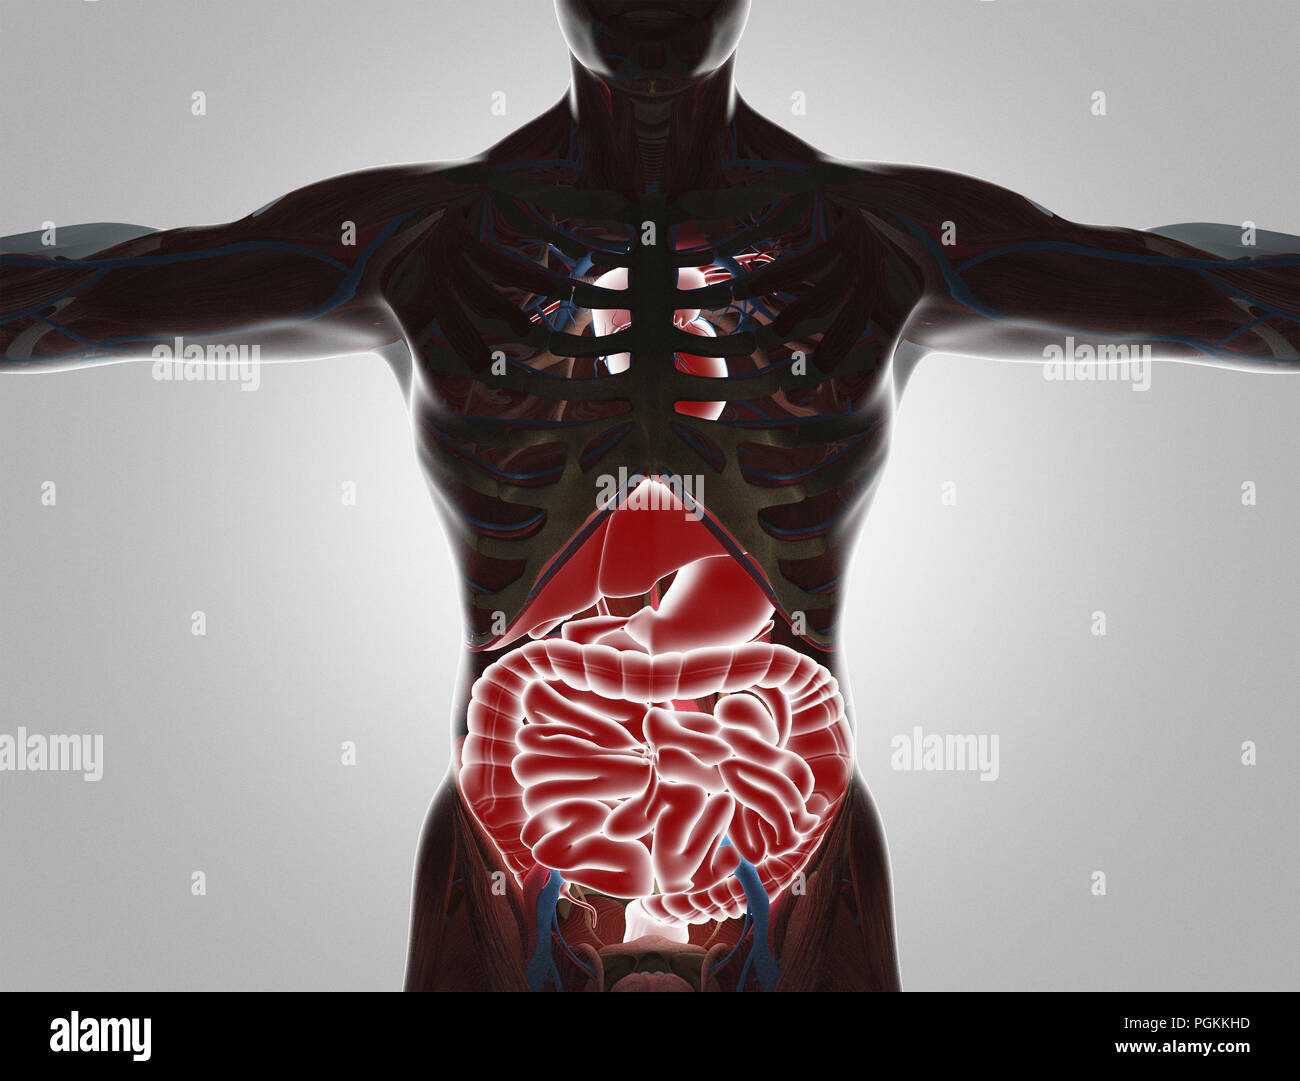 Human body with visible organs, 3d render illustration Stock Photo